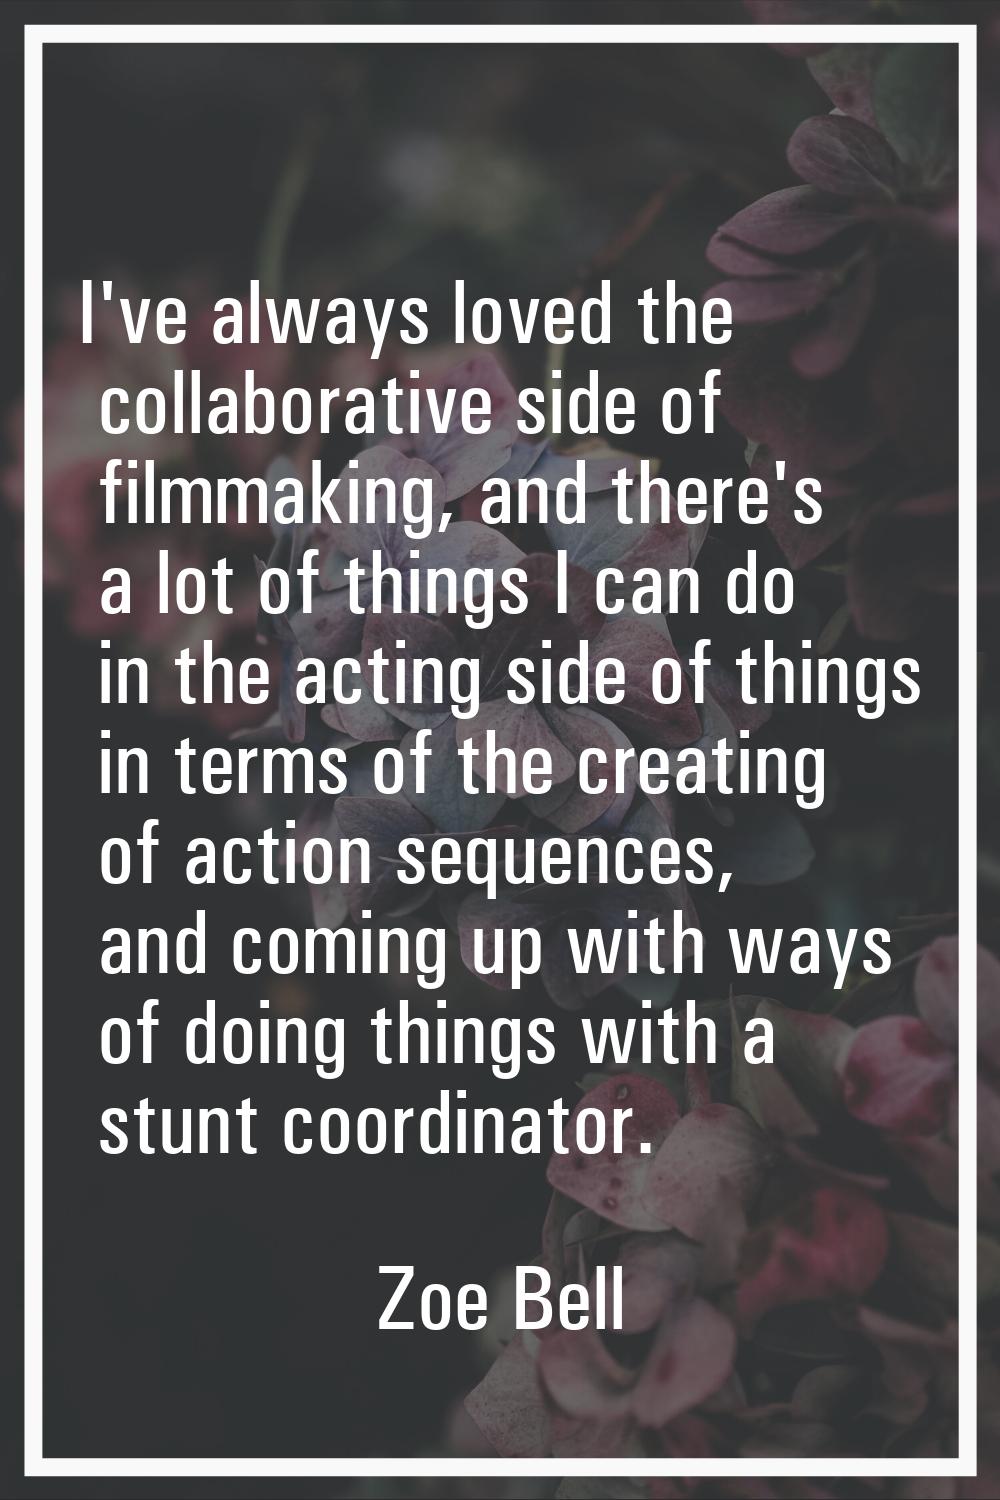 I've always loved the collaborative side of filmmaking, and there's a lot of things I can do in the